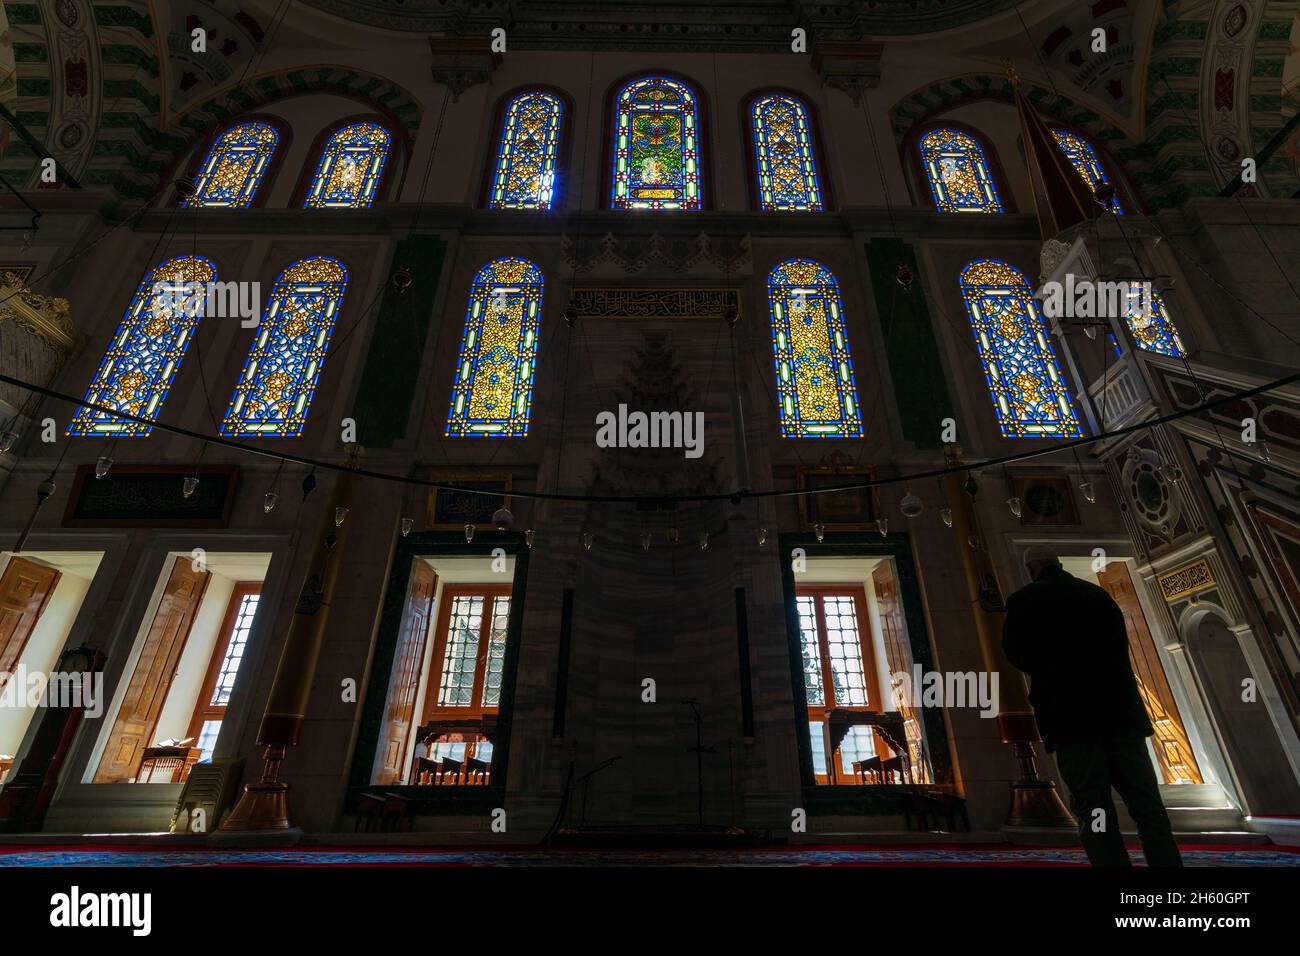 Silhouette shot of group of colorful stained glass at public ottoman Fatih Mosque, located in Fatih district of Istanbul, Turkey Stock Photo